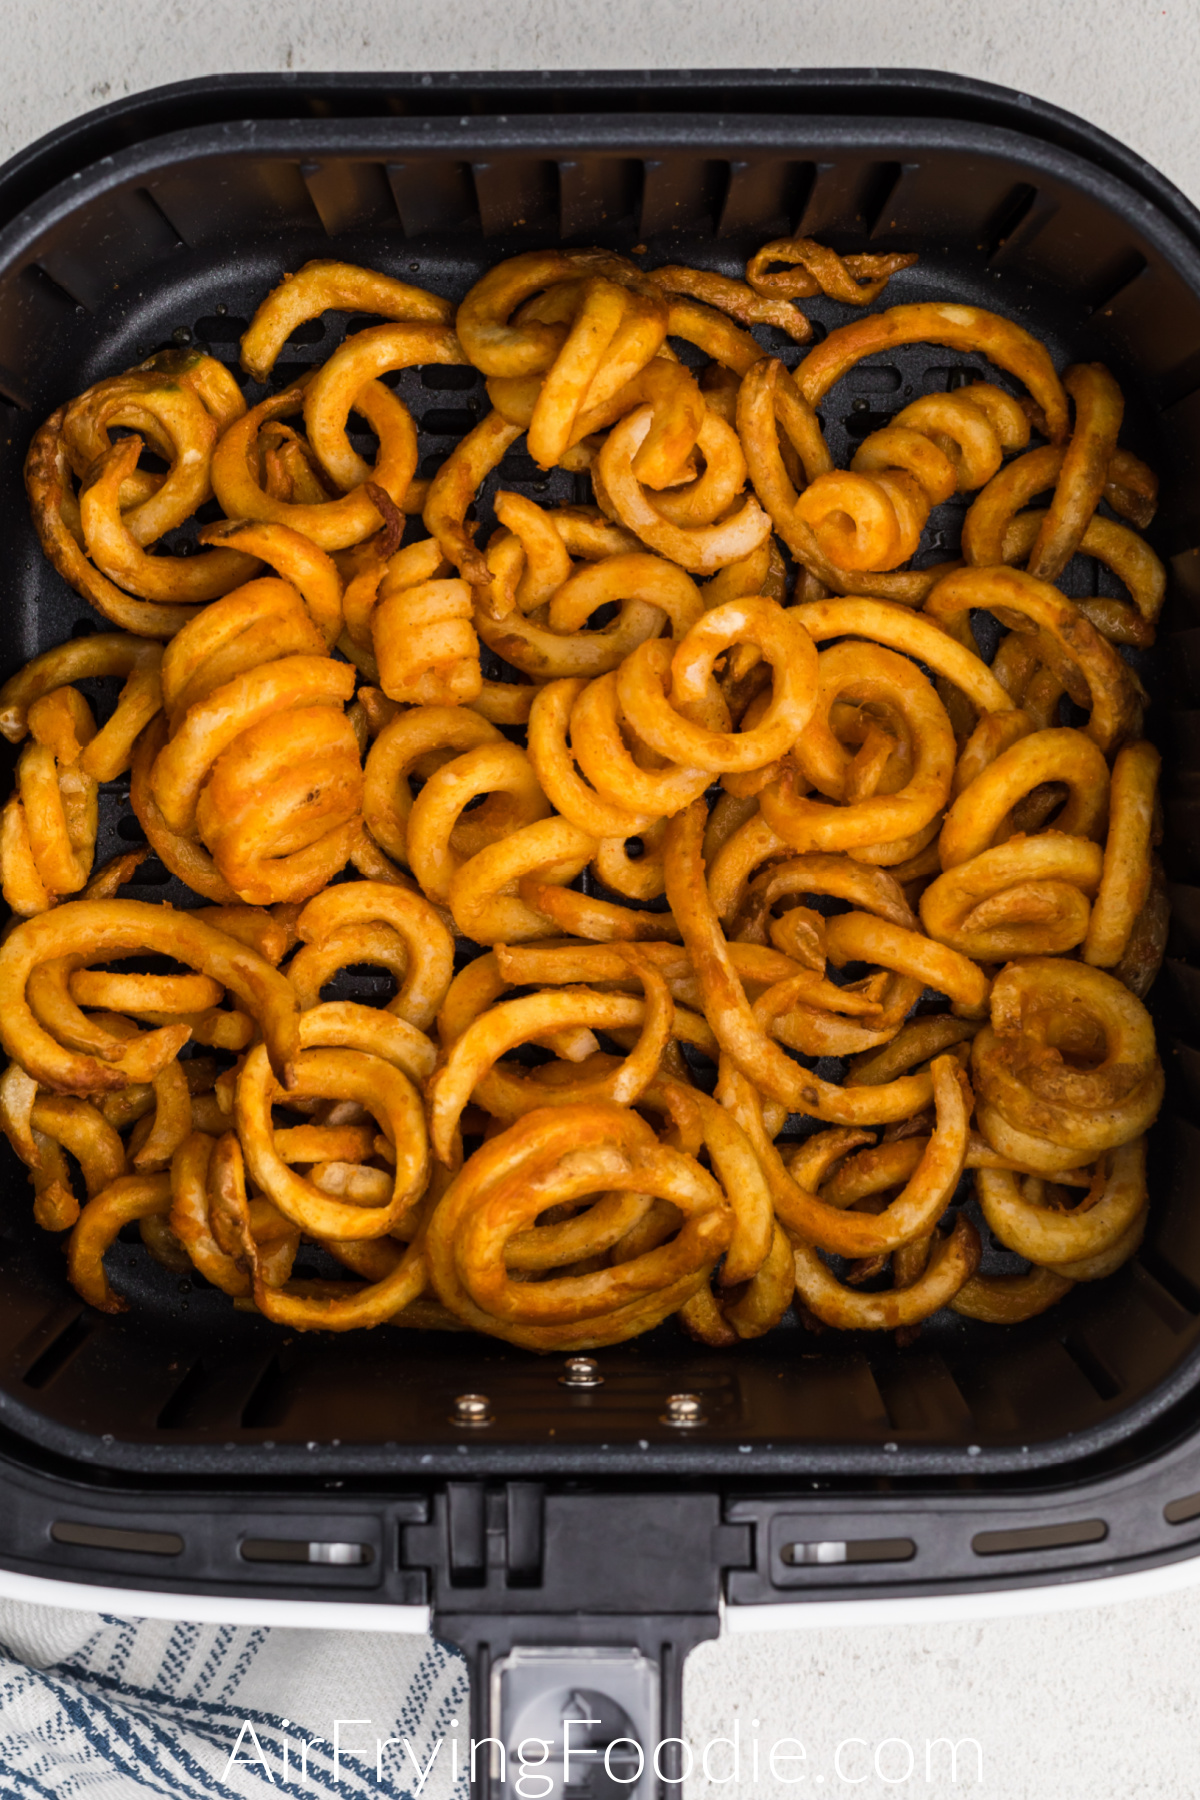 Cooked and crispy curly fries in air fryer basket, ready to serve.